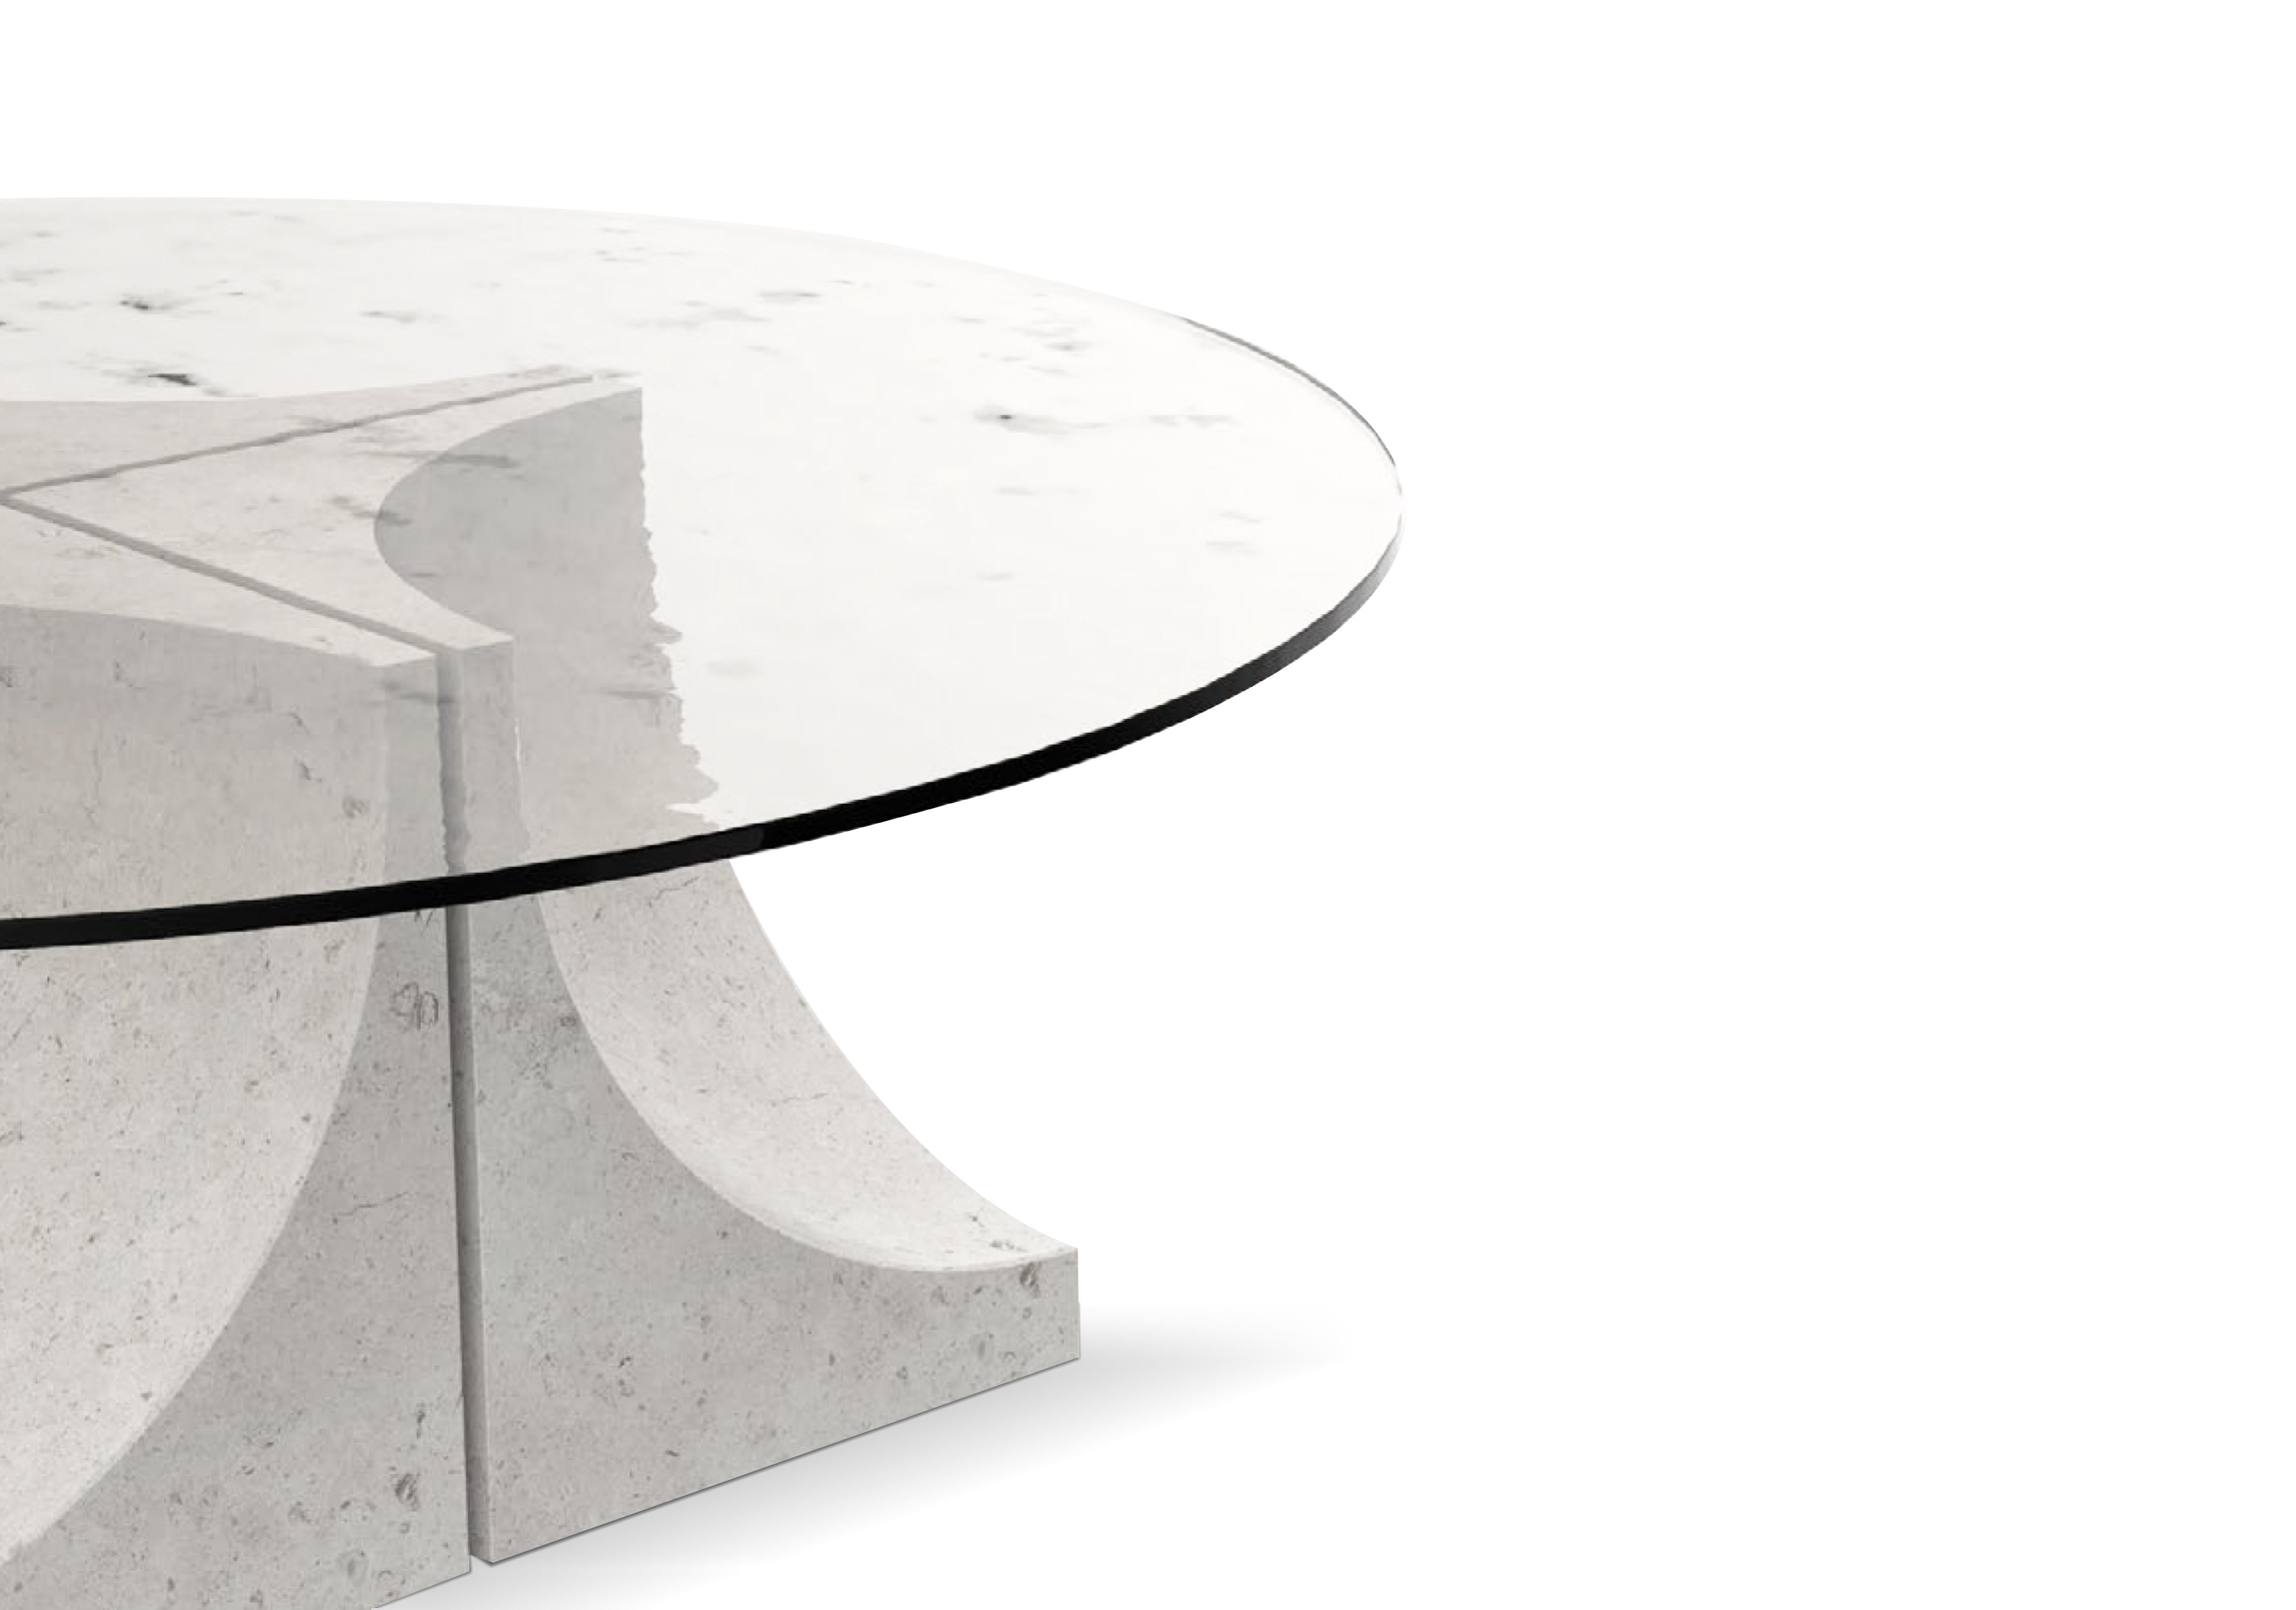 Contemporary Modern Edge Center Table (4 legs) in Marble & Glass by Collector Studio

Family of coffee tables, console and dining tables characterized by an architectural and sculptural base, combined with a glass top.

 
DIMENSIONS
Ø 80 cm  31”
H